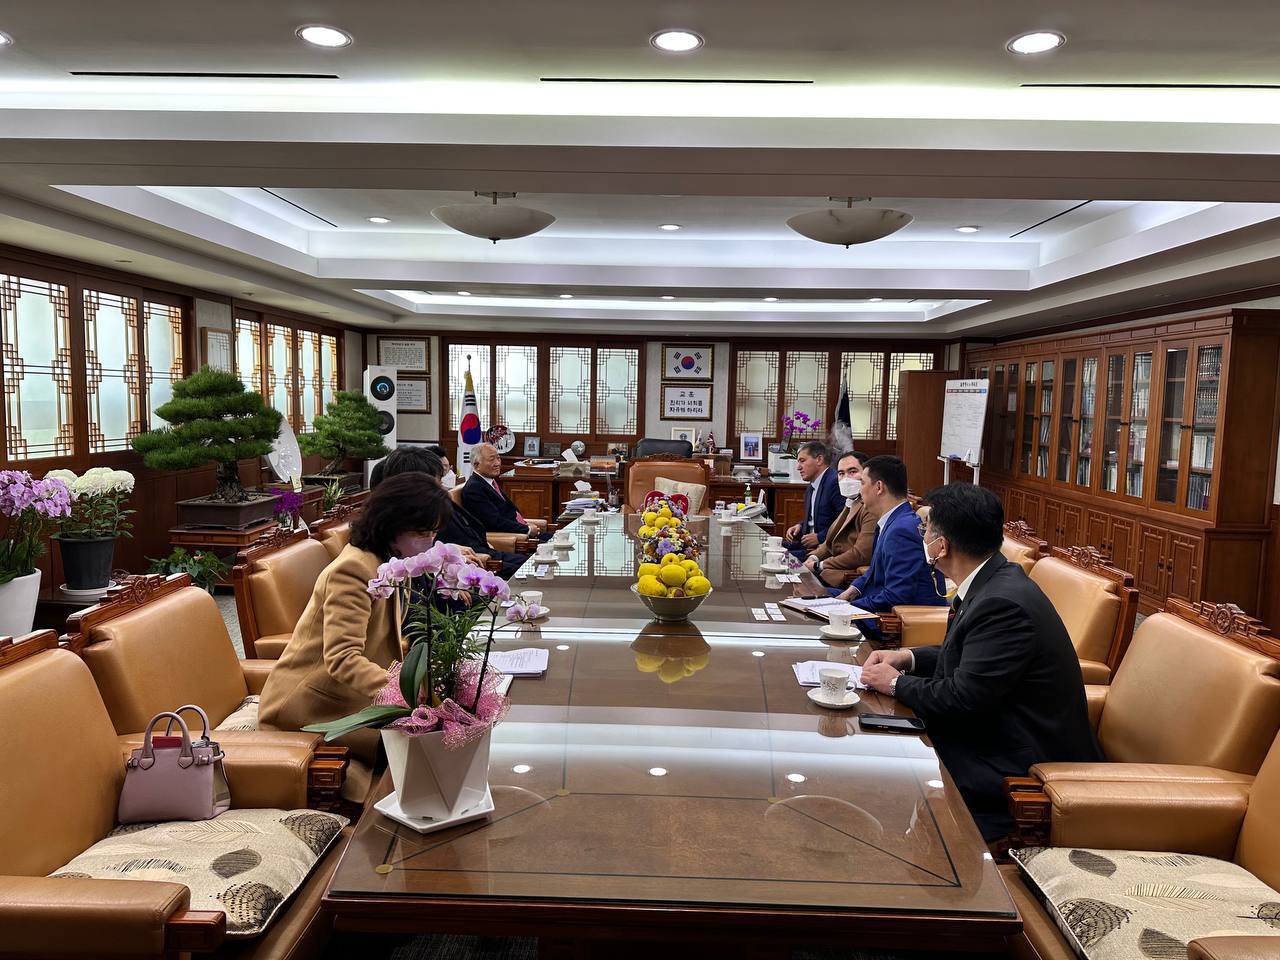 The visit of the official delegation to South Korea, headed by the founder of the Kimyo International University in Tashkent, A. Vakhobov, and the rector, J. Kudaybergenov, continues.